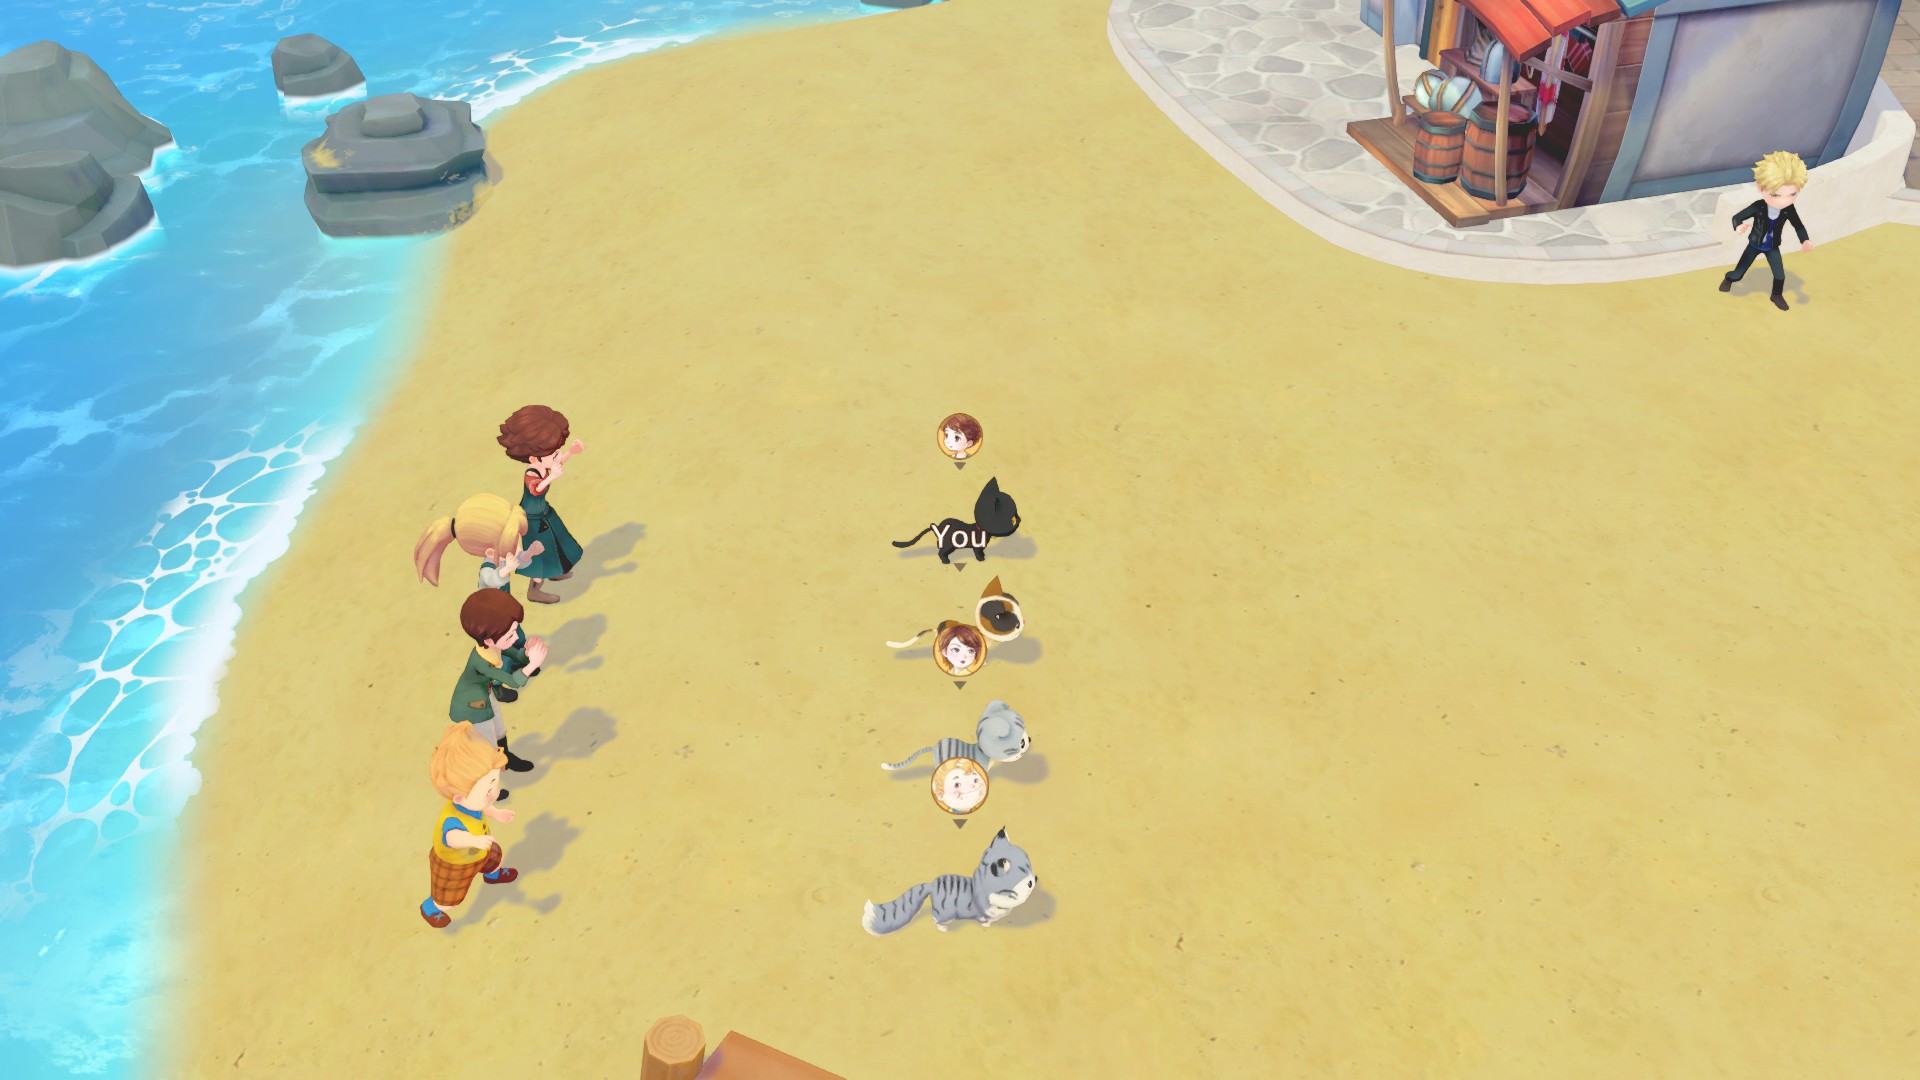 4 people including my protagonist stand on a beach with their cats at the start of a race.